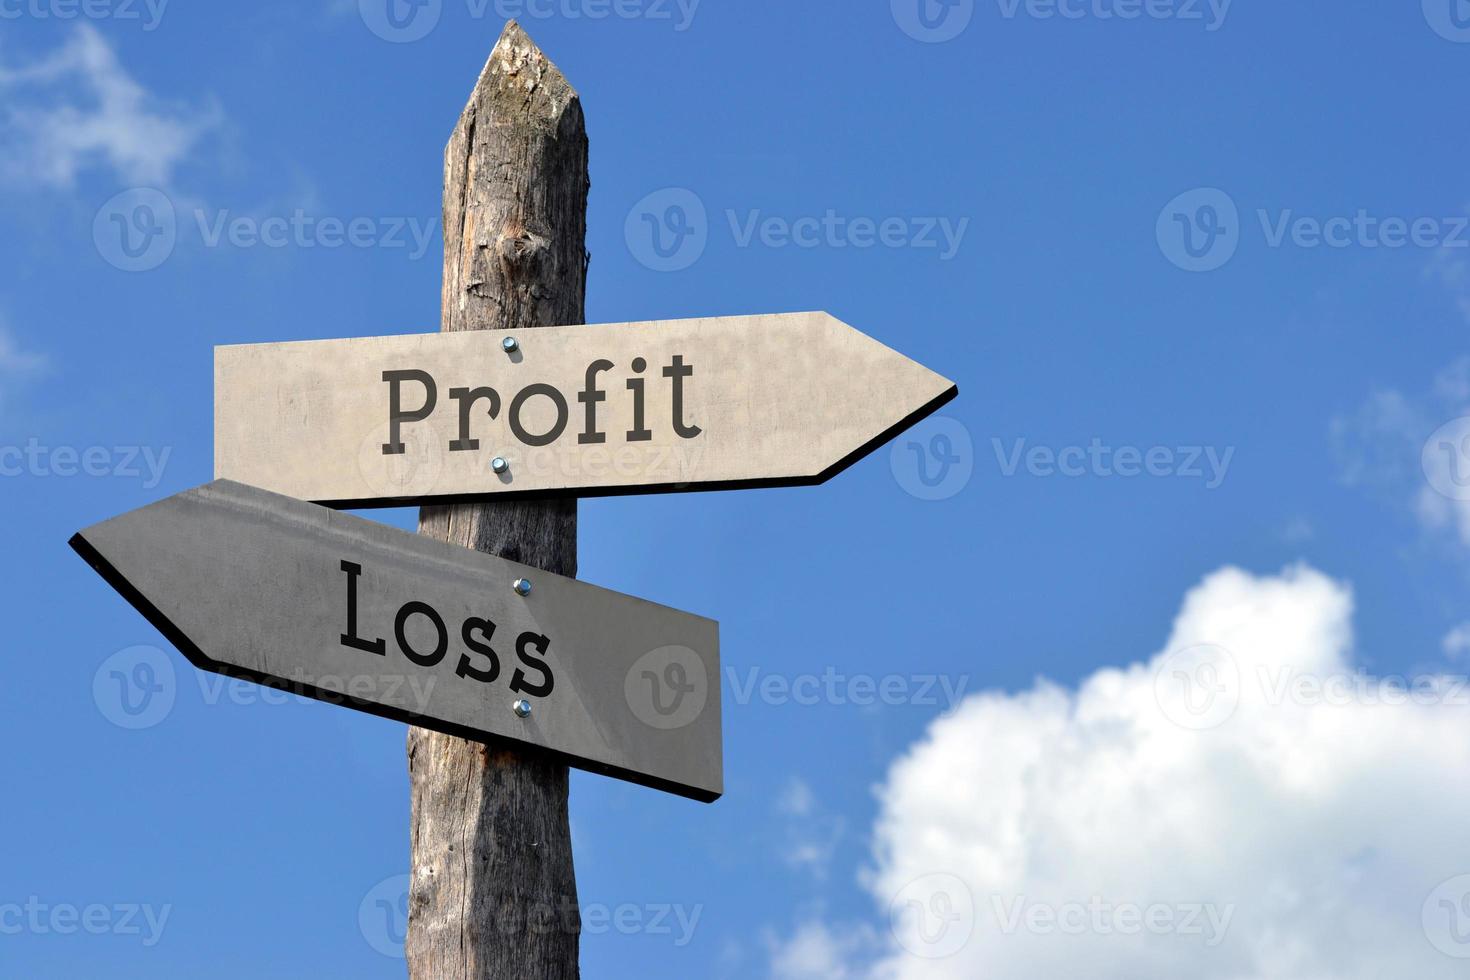 Profit or Loss - Wooden Signpost with Two Arrows, Sky with Clouds photo